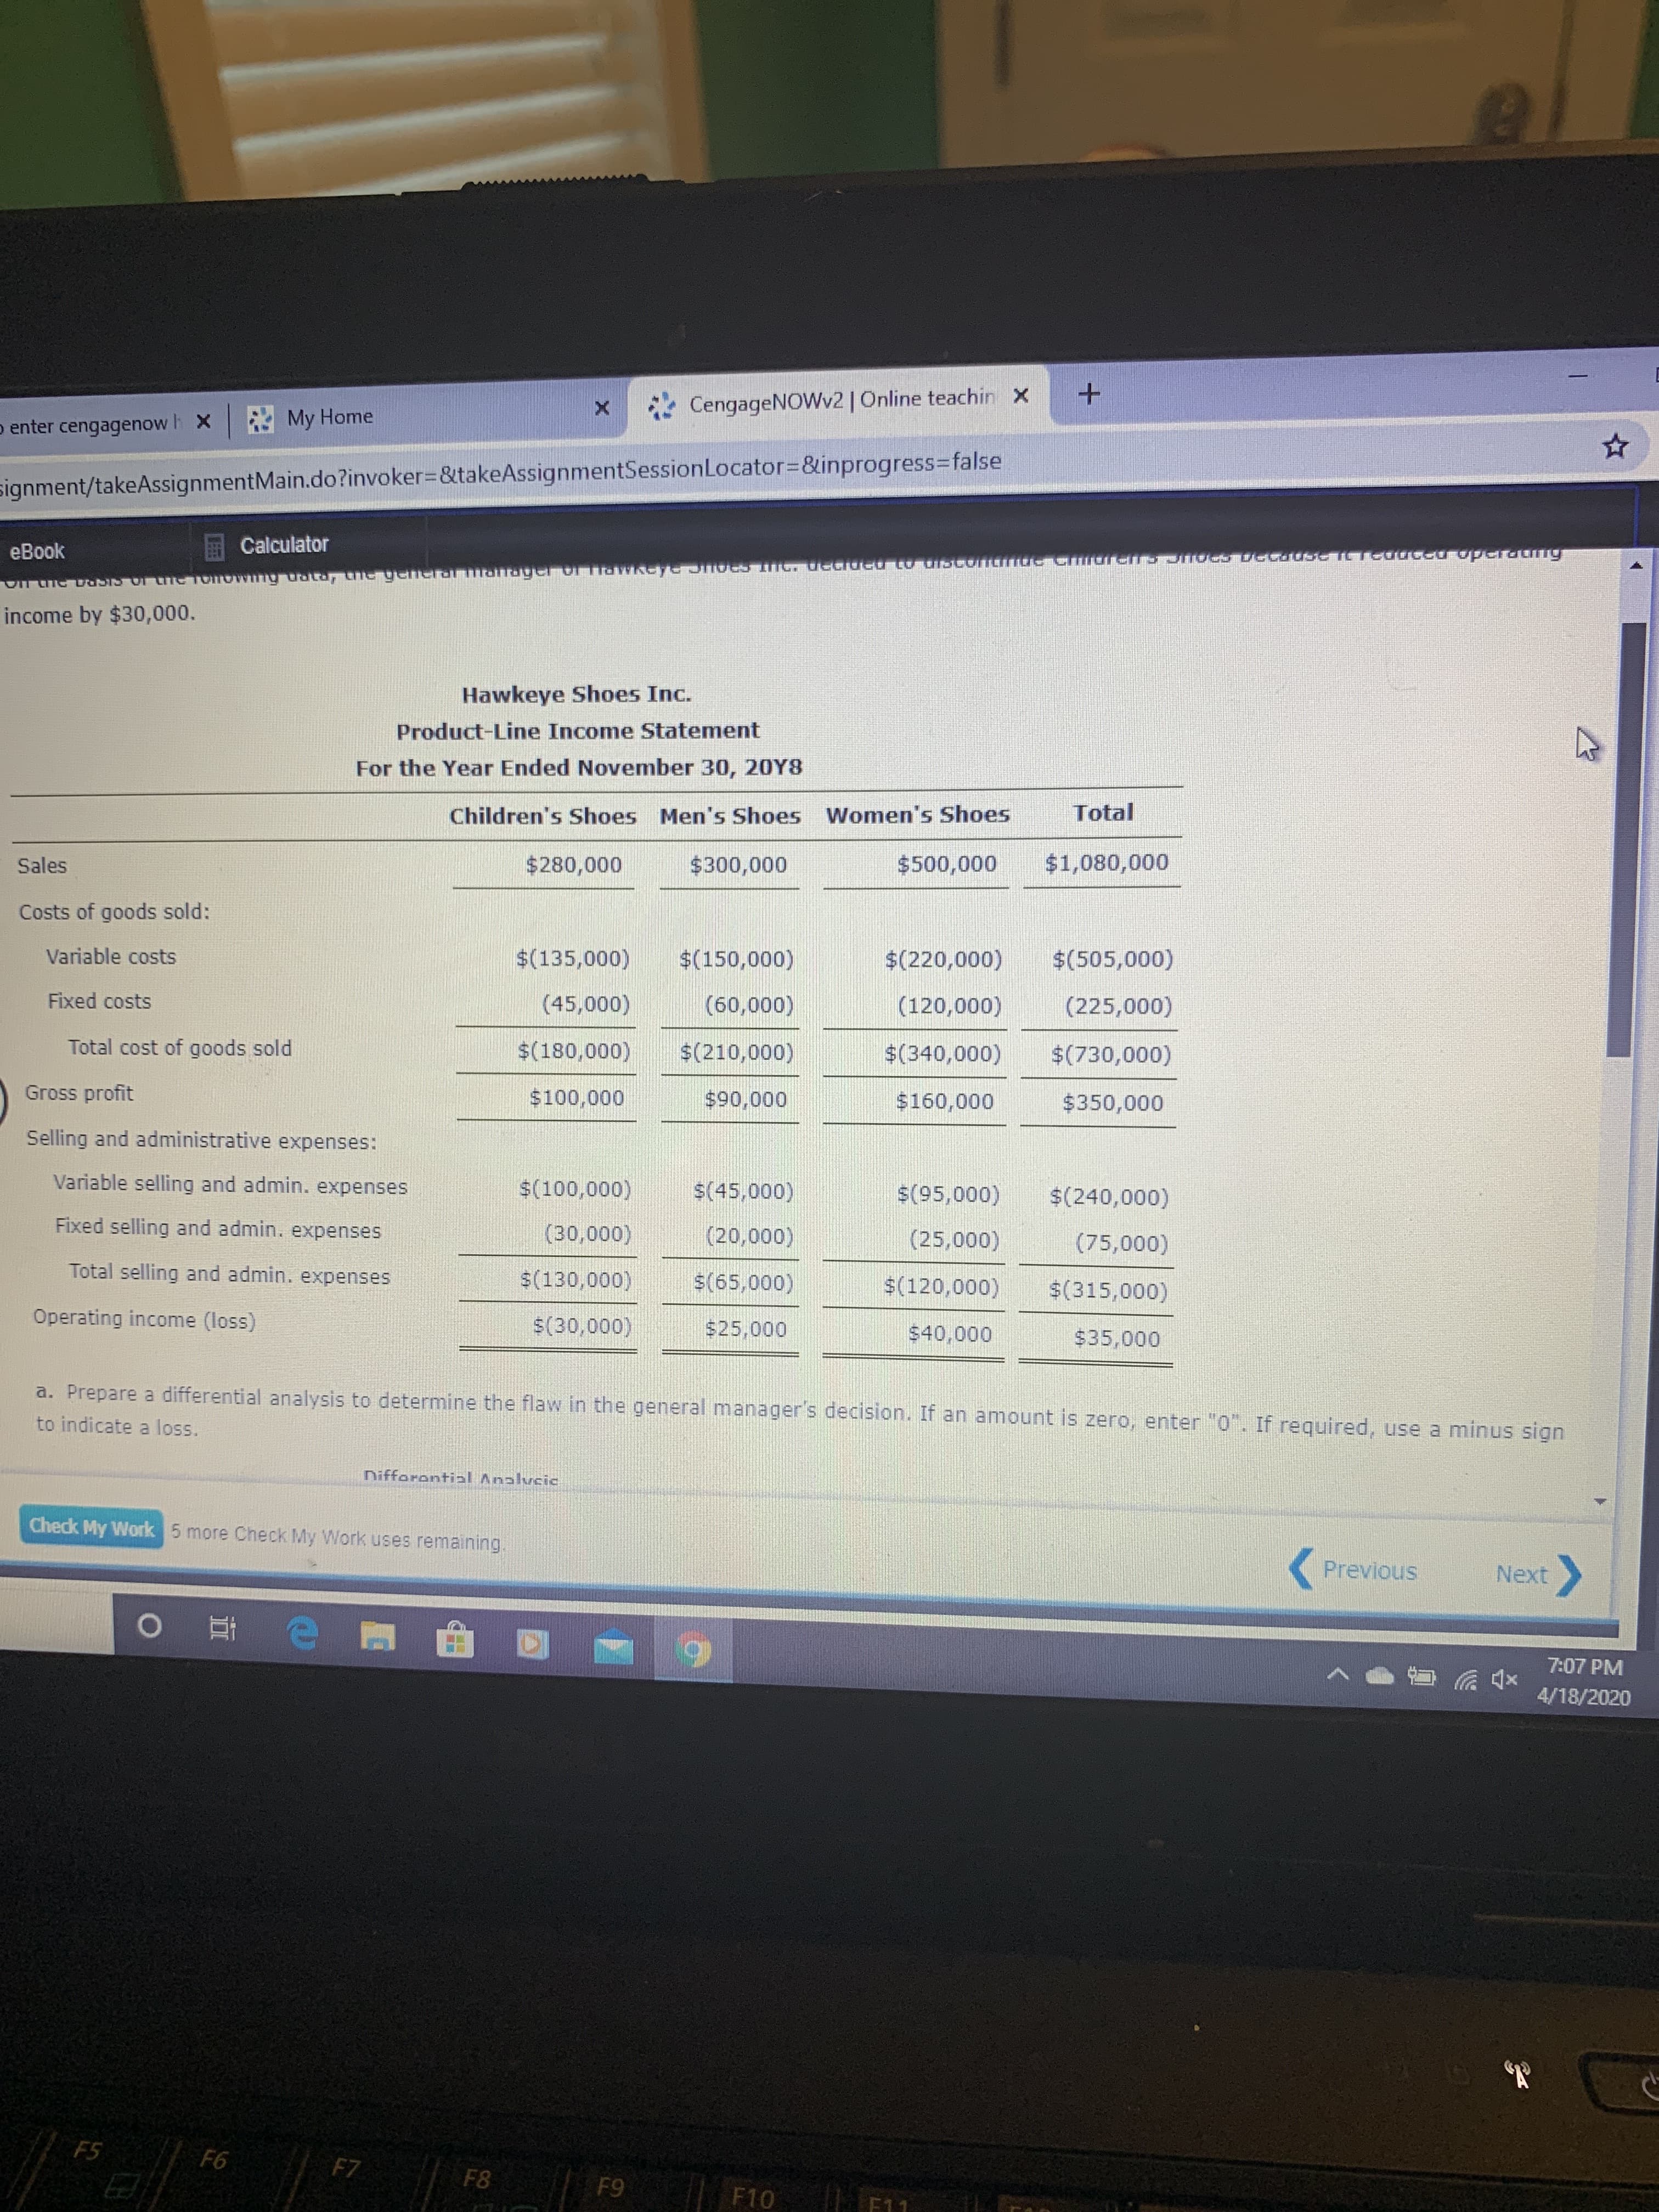 CengageNOWv2| Online teachin x
p enter cengagenow h X
My Home
signment/takeAssignmentMain.do?invoker=&takeAssignmentSessionLocator3D&inprogress3Dfalse
eBook
Calculator
On the baIS or the Tomowmg dato unyenerarmanager
income by $30,000.
Hawkeye Shoes Inc.
Product-Line Income Statement
For the Year Ended November 30, 20Y8
Children's Shoes Men's Shoes Women's Shoes
Total
Sales
$280,000
$300,000
$500,000
$1,080,000
Costs of goods sold:
Variable costs
$(135,000)
$(150,000)
$(220,000)
$(505,000)
Fixed costs
(45,000)
(60,000)
(120,000)
(225,000)
Total cost of goods sold
$(180,000)
$(210,000)
$(340,000)
$(730,000)
Gross profit
$100,000
$90,000
$160,000
$350,000
Selling and administrative expenses:
Variable selling and admin. expenses
$(100,000)
$(45,000)
$(95,000)
$(240,000)
Fixed selling and admin. expenses
(30,000)
(20,000)
(25,000)
(75,000)
Total selling and admin. expenses
$(130,000)
$(65,000)
$(120,000)
$(315,000)
Operating income (loss)
$(30,000)
$25,000
$40,000
$35,000
a. Prepare a differential analysis to determine the flaw in the general manager's decision. If an amount is zero, enter "0". If required, use a minus sign
to indicate a loss.
Difforontial Analycic
Check My Work 5 more Check My Work uses remaining.
Previous
Next
7:07 PM
4/18/2020
×p ツ
F5
F6
F7
F8
F9
F10
E11
